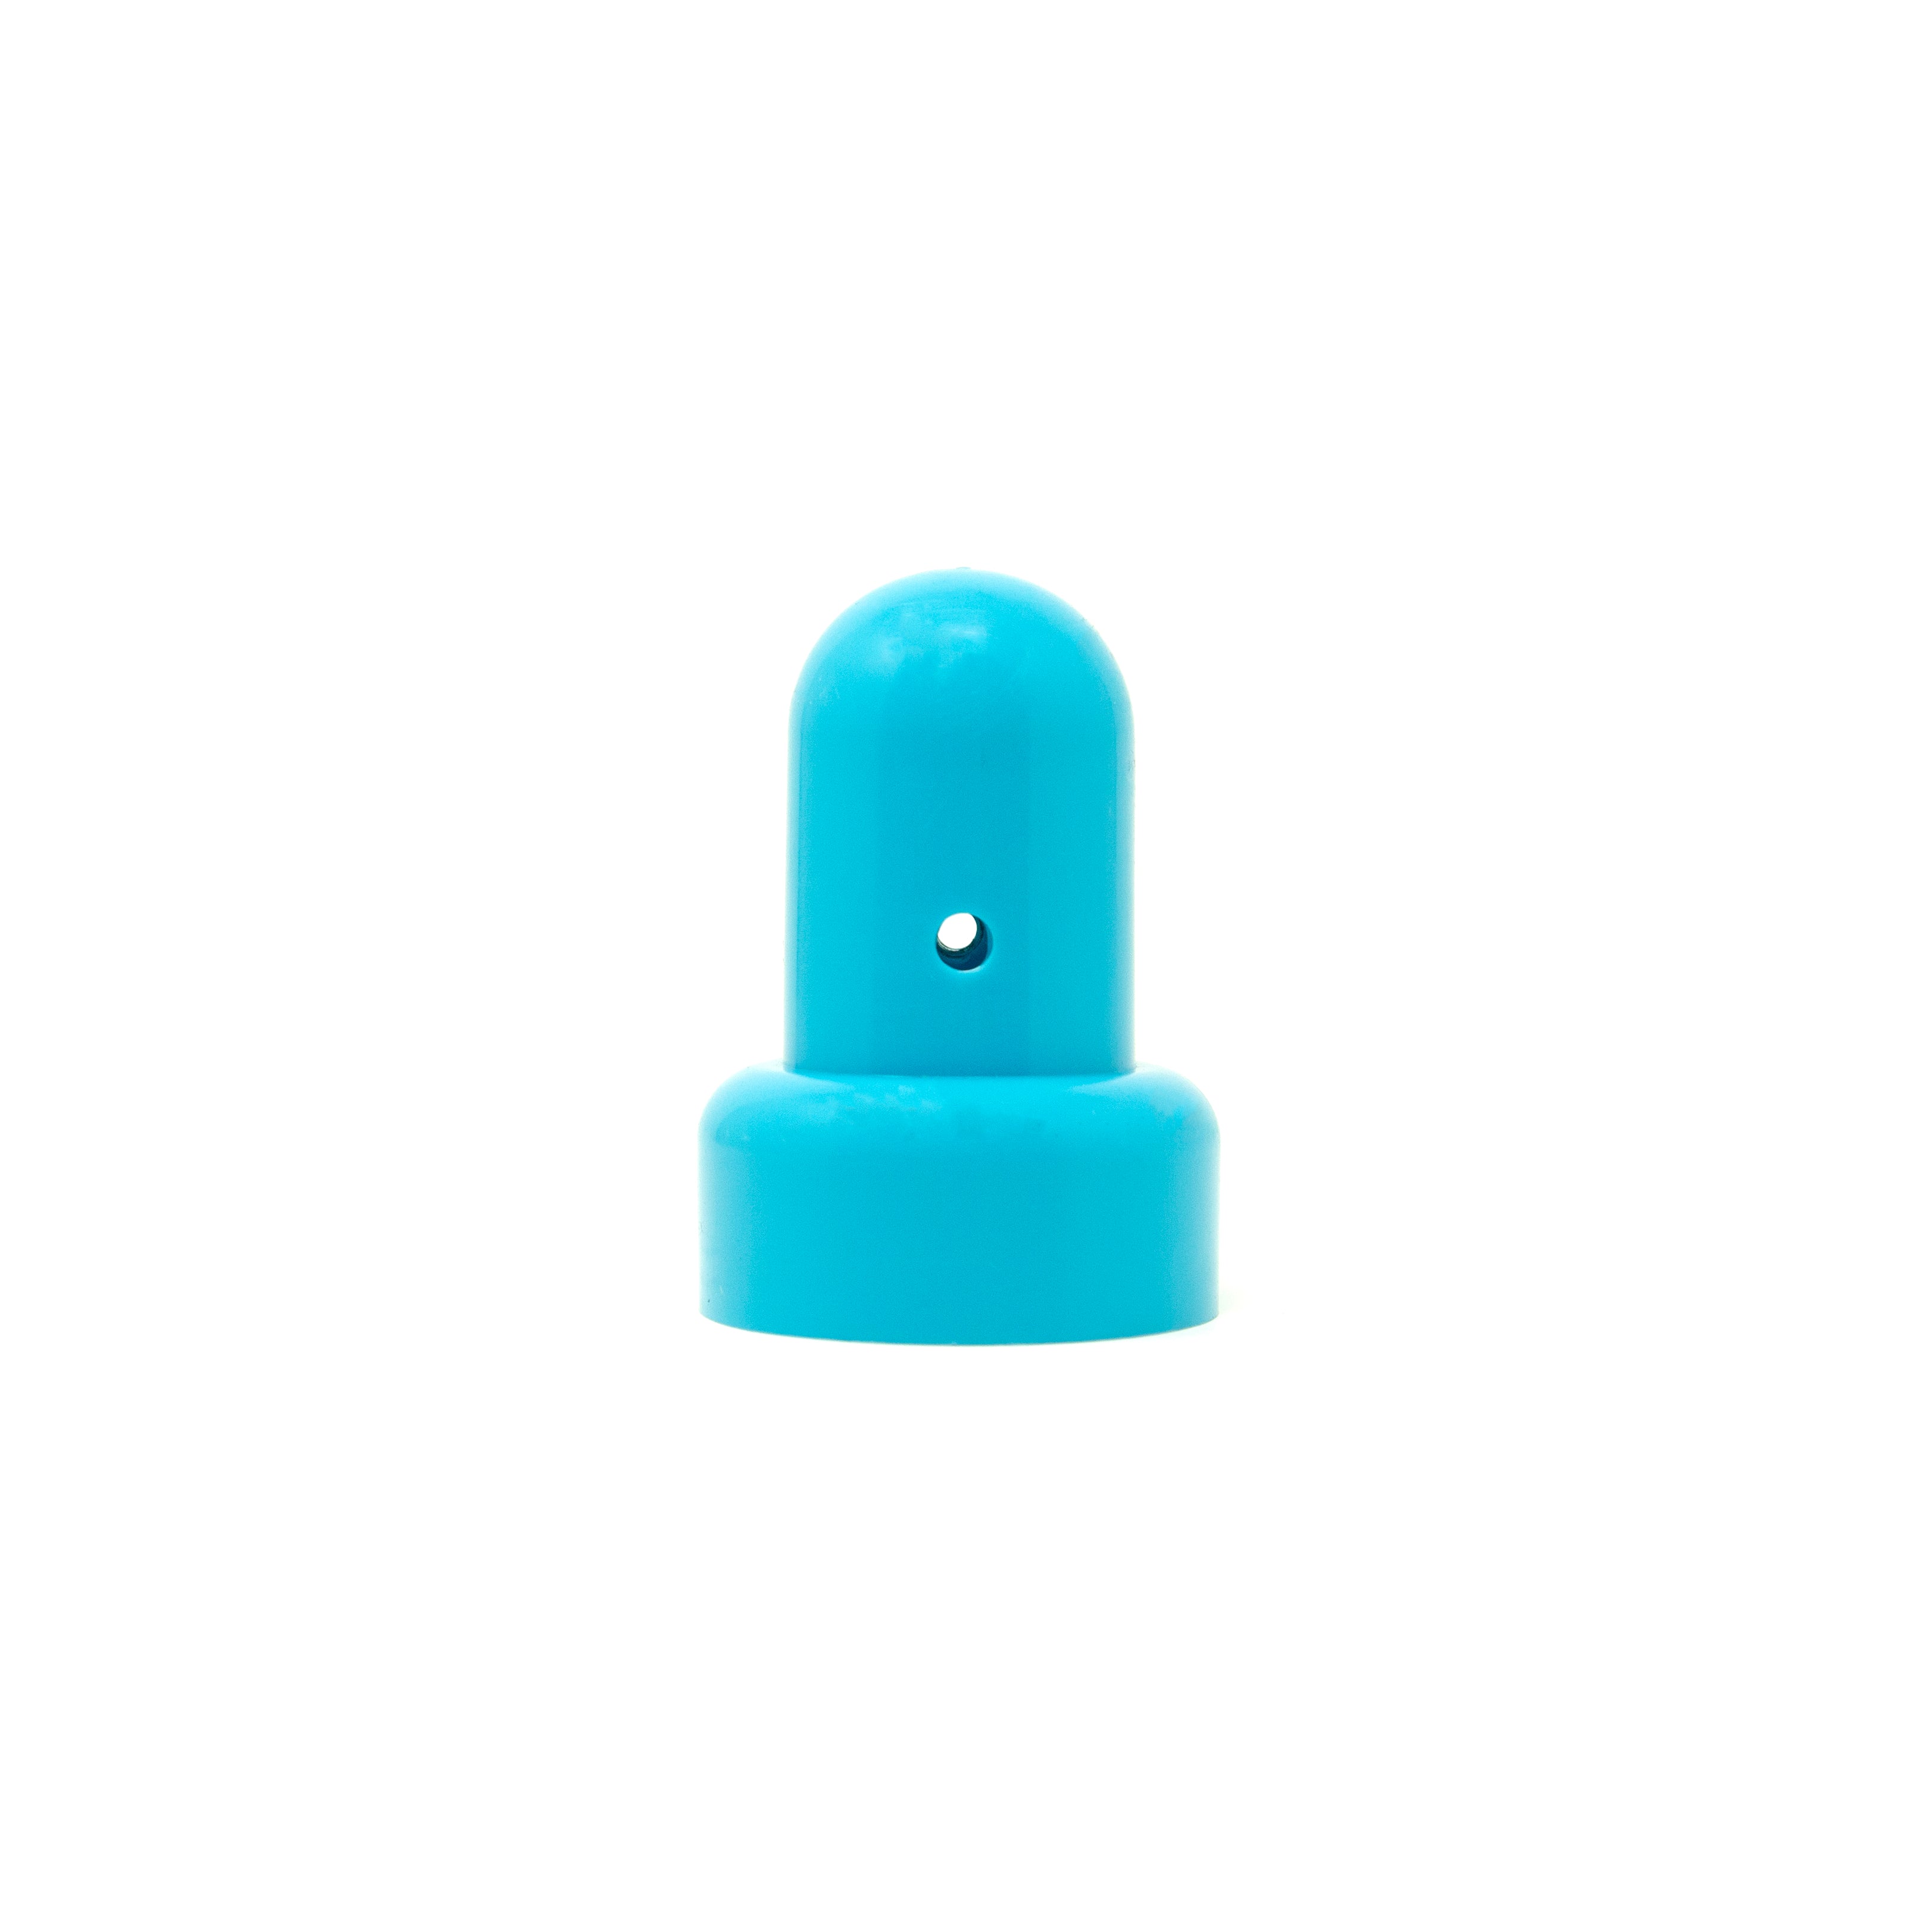 Teal pole cap with the round hole side facing forward. 